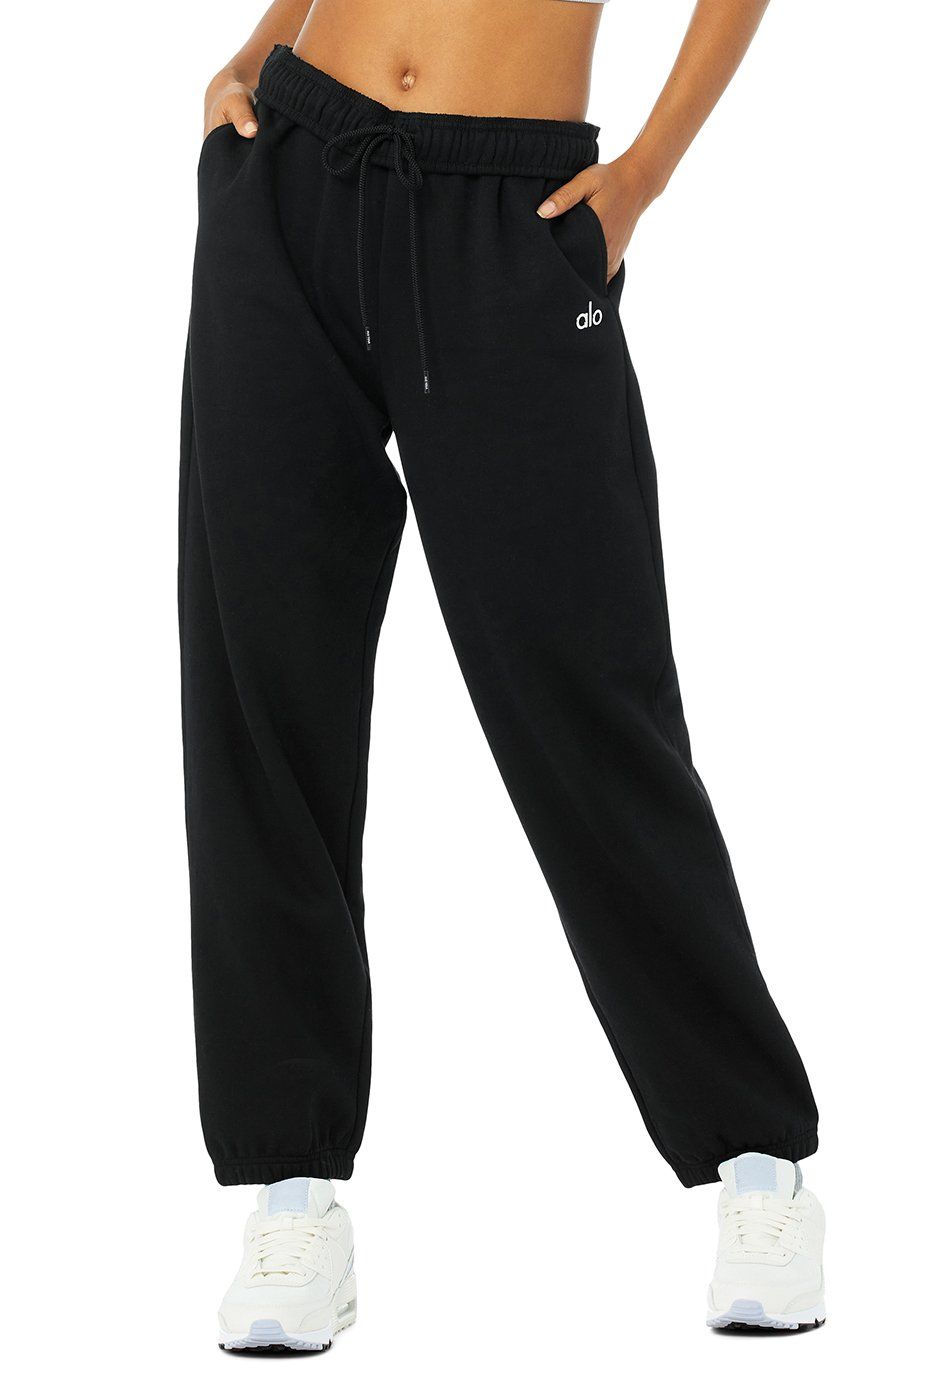 Why Do College Girls Wear Sweatpants All The Time? – solowomen